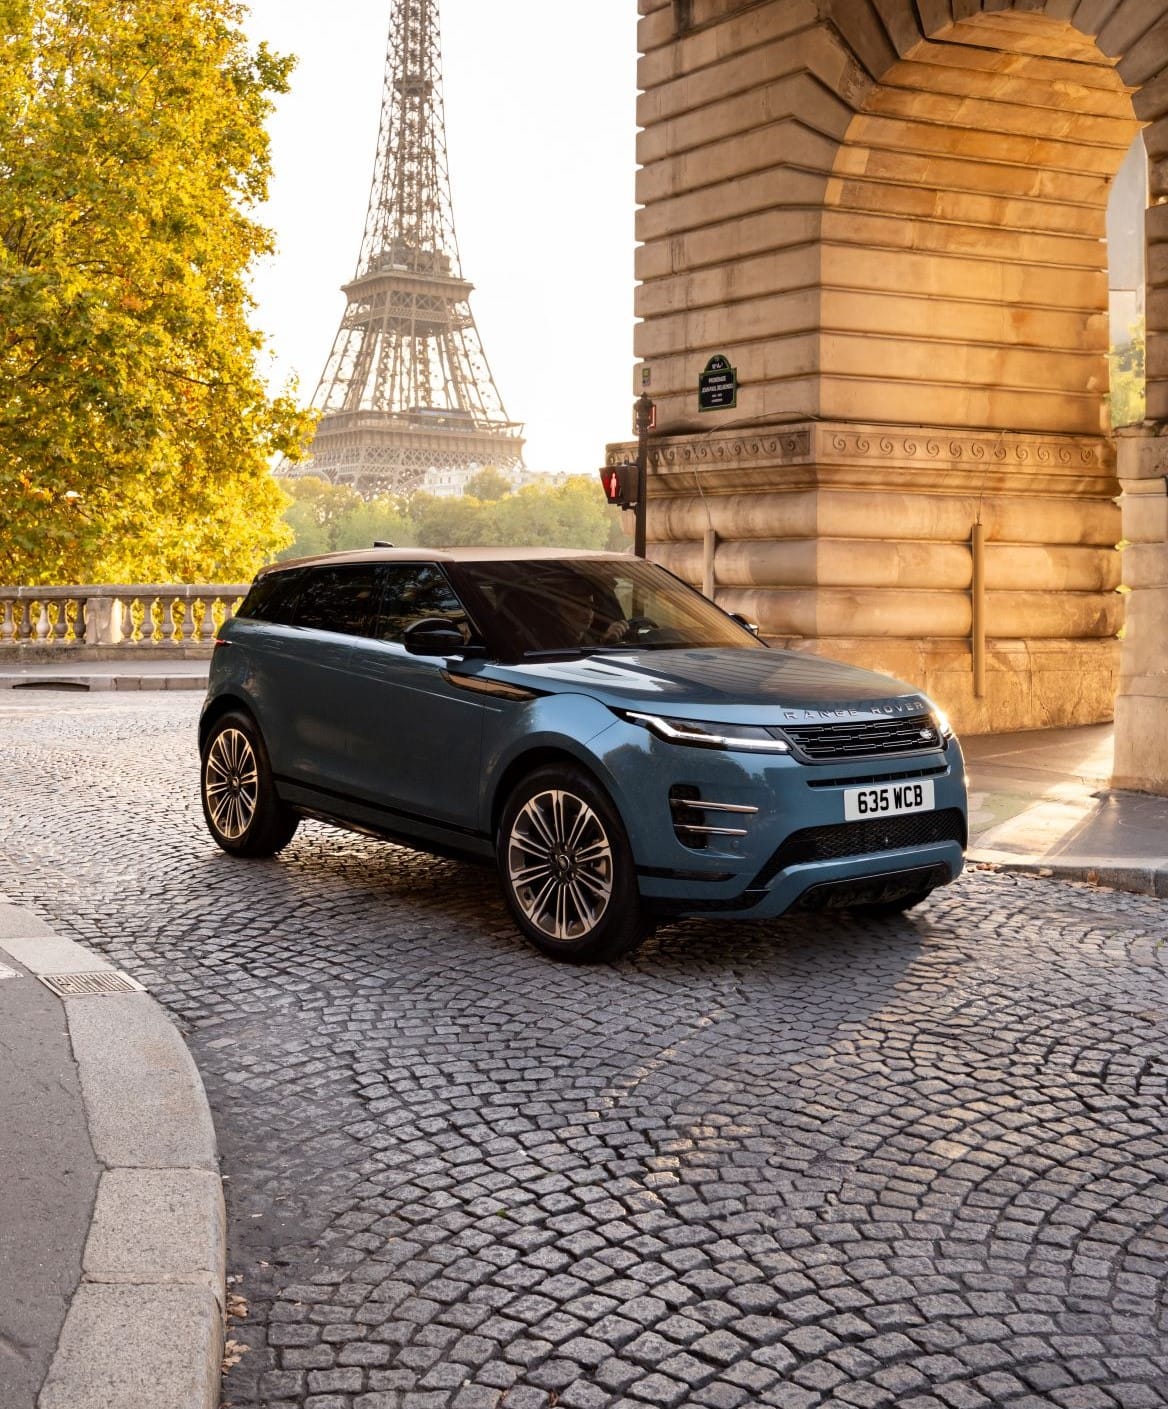 Range Rover Evoque - new design and sophisticated technologies amplify true modern luxury